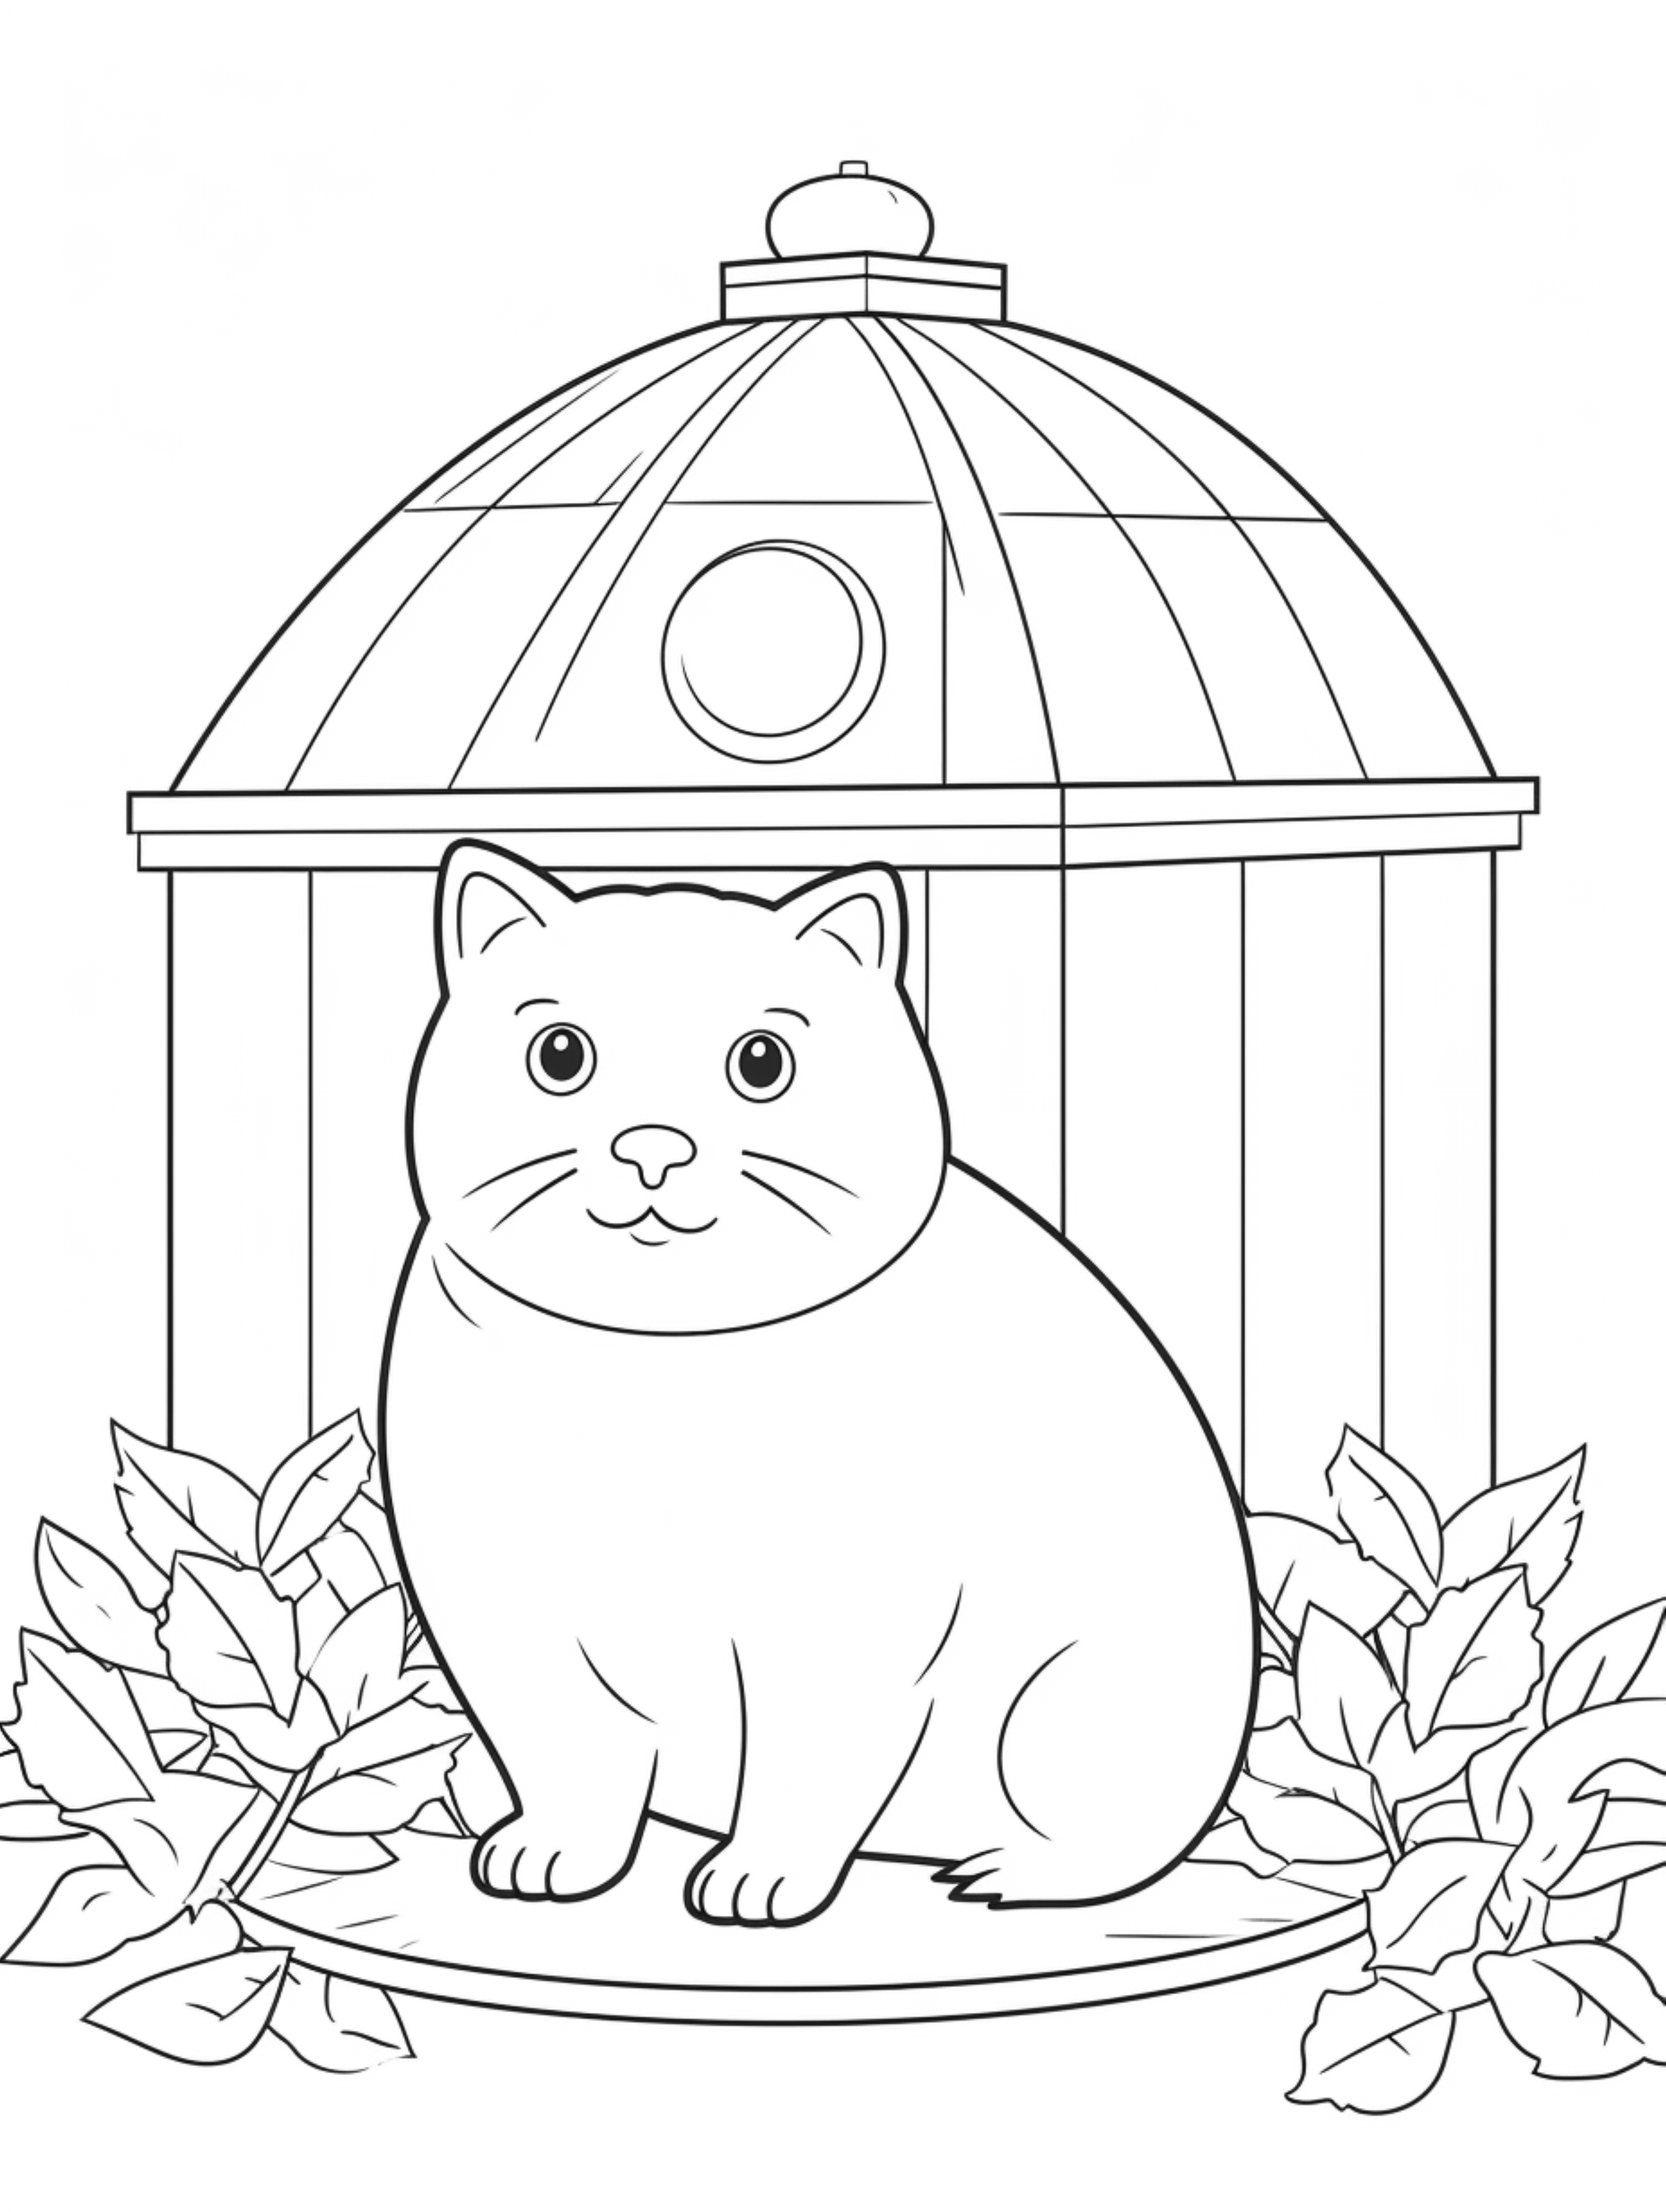 fat cat coloring pages